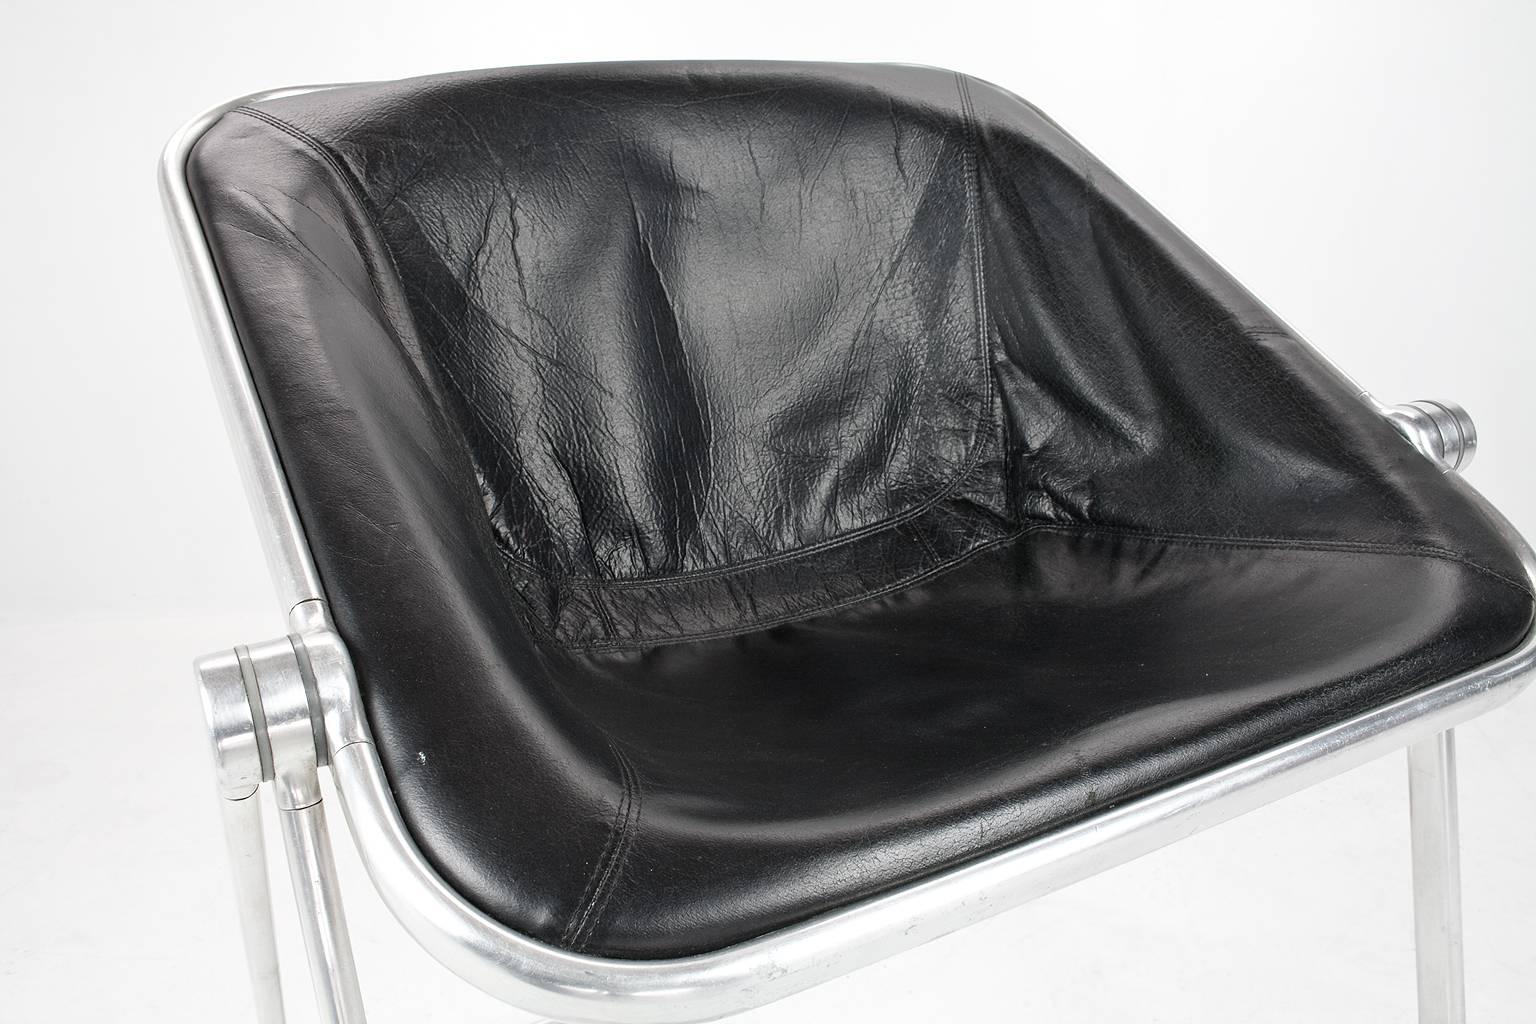 Mid-20th Century Leather Lounge Chair by Giancarlo Piretti for Casteli in 1969 Italian Design